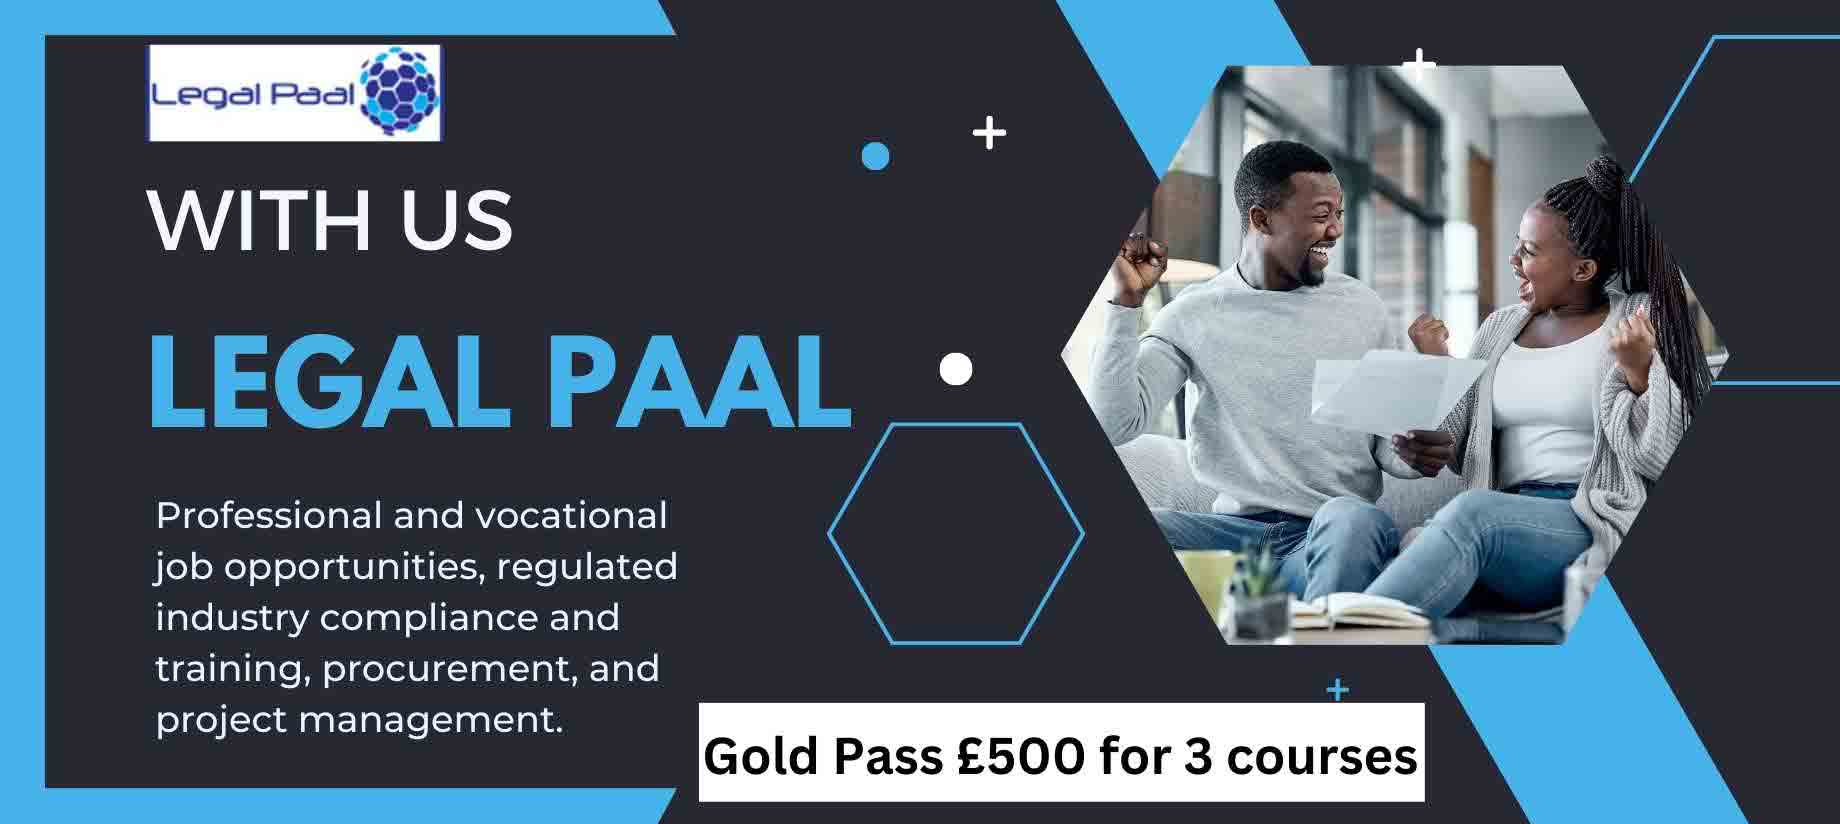 Gold Pass £500 for 3 courses